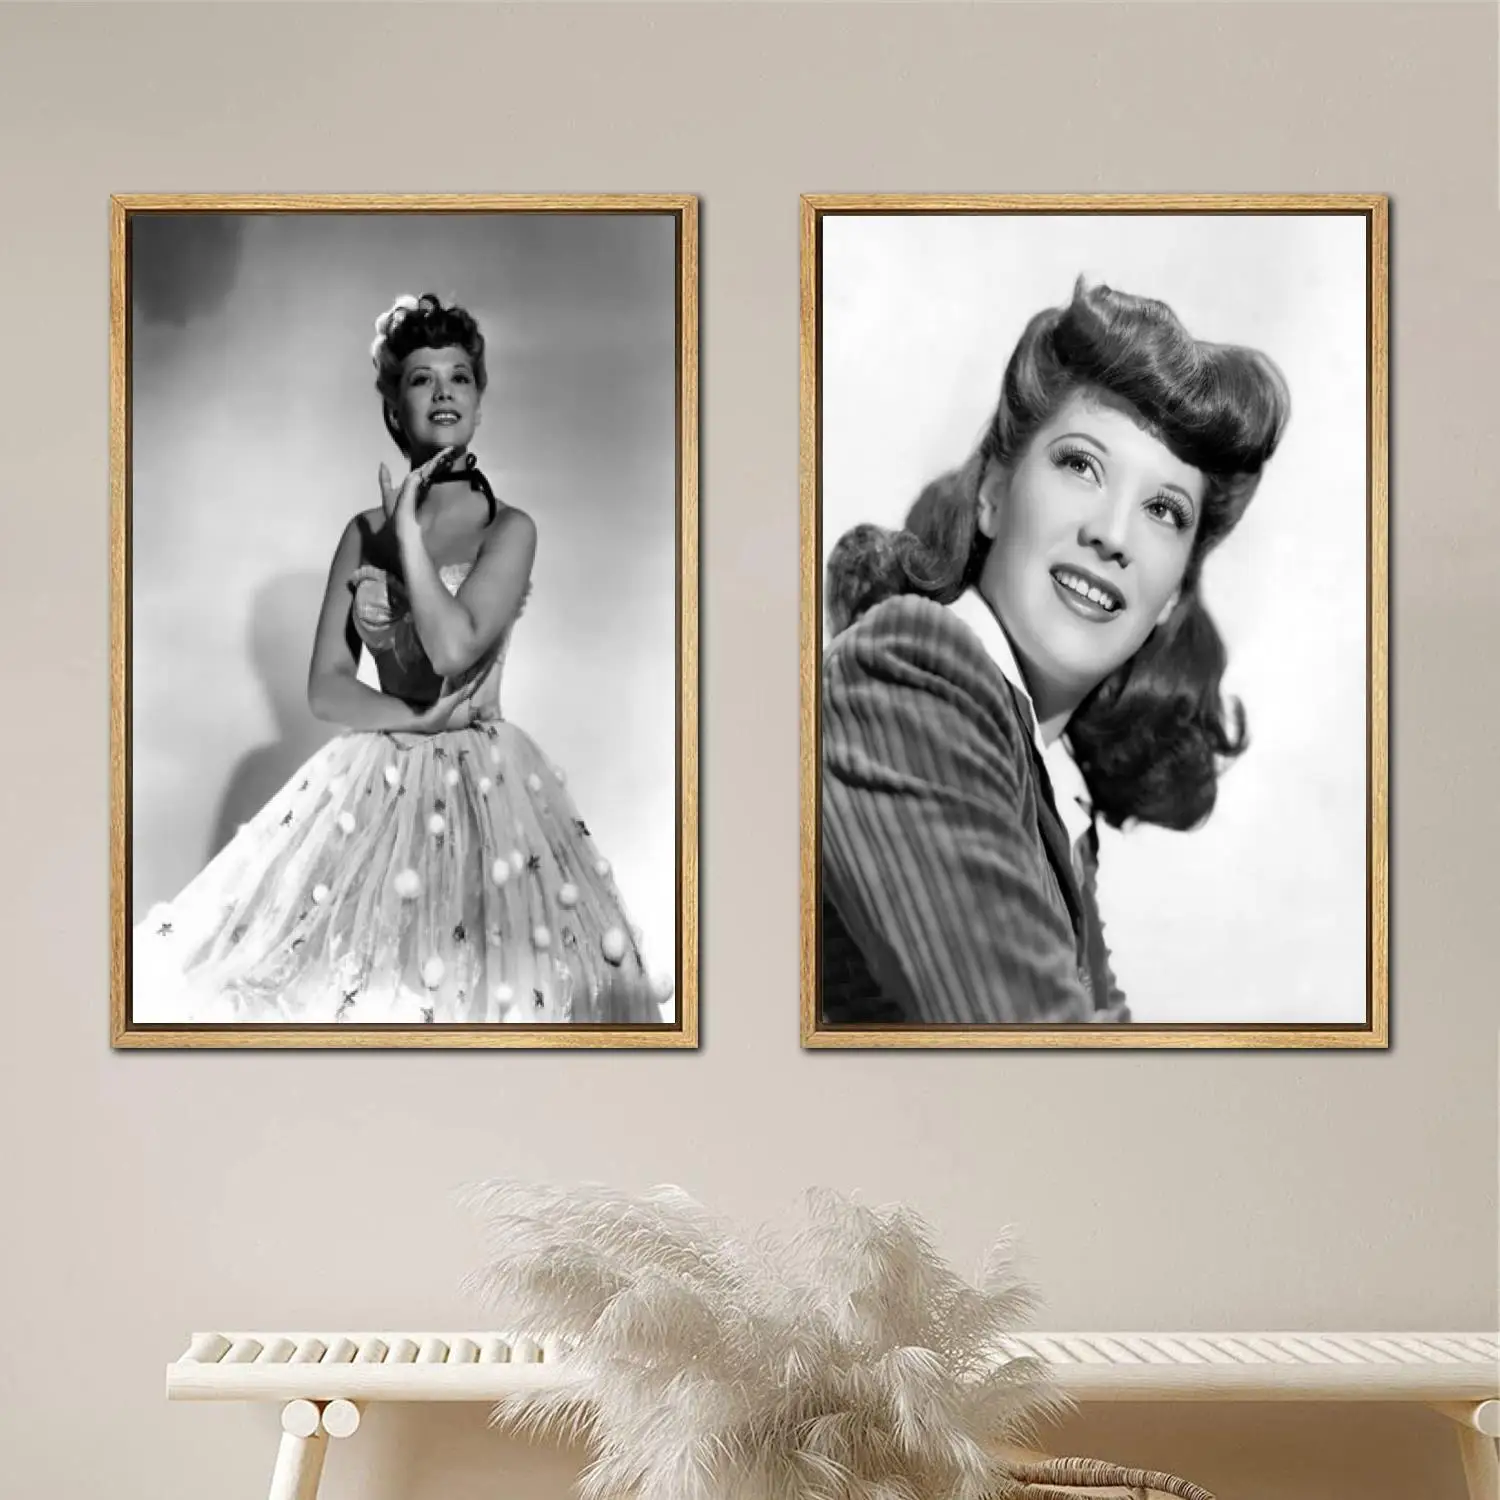 Dinah Shore Poster Painting 24x36 Wall Art Canvas Posters room decor Modern Family bedroom Decoration Art wall decor